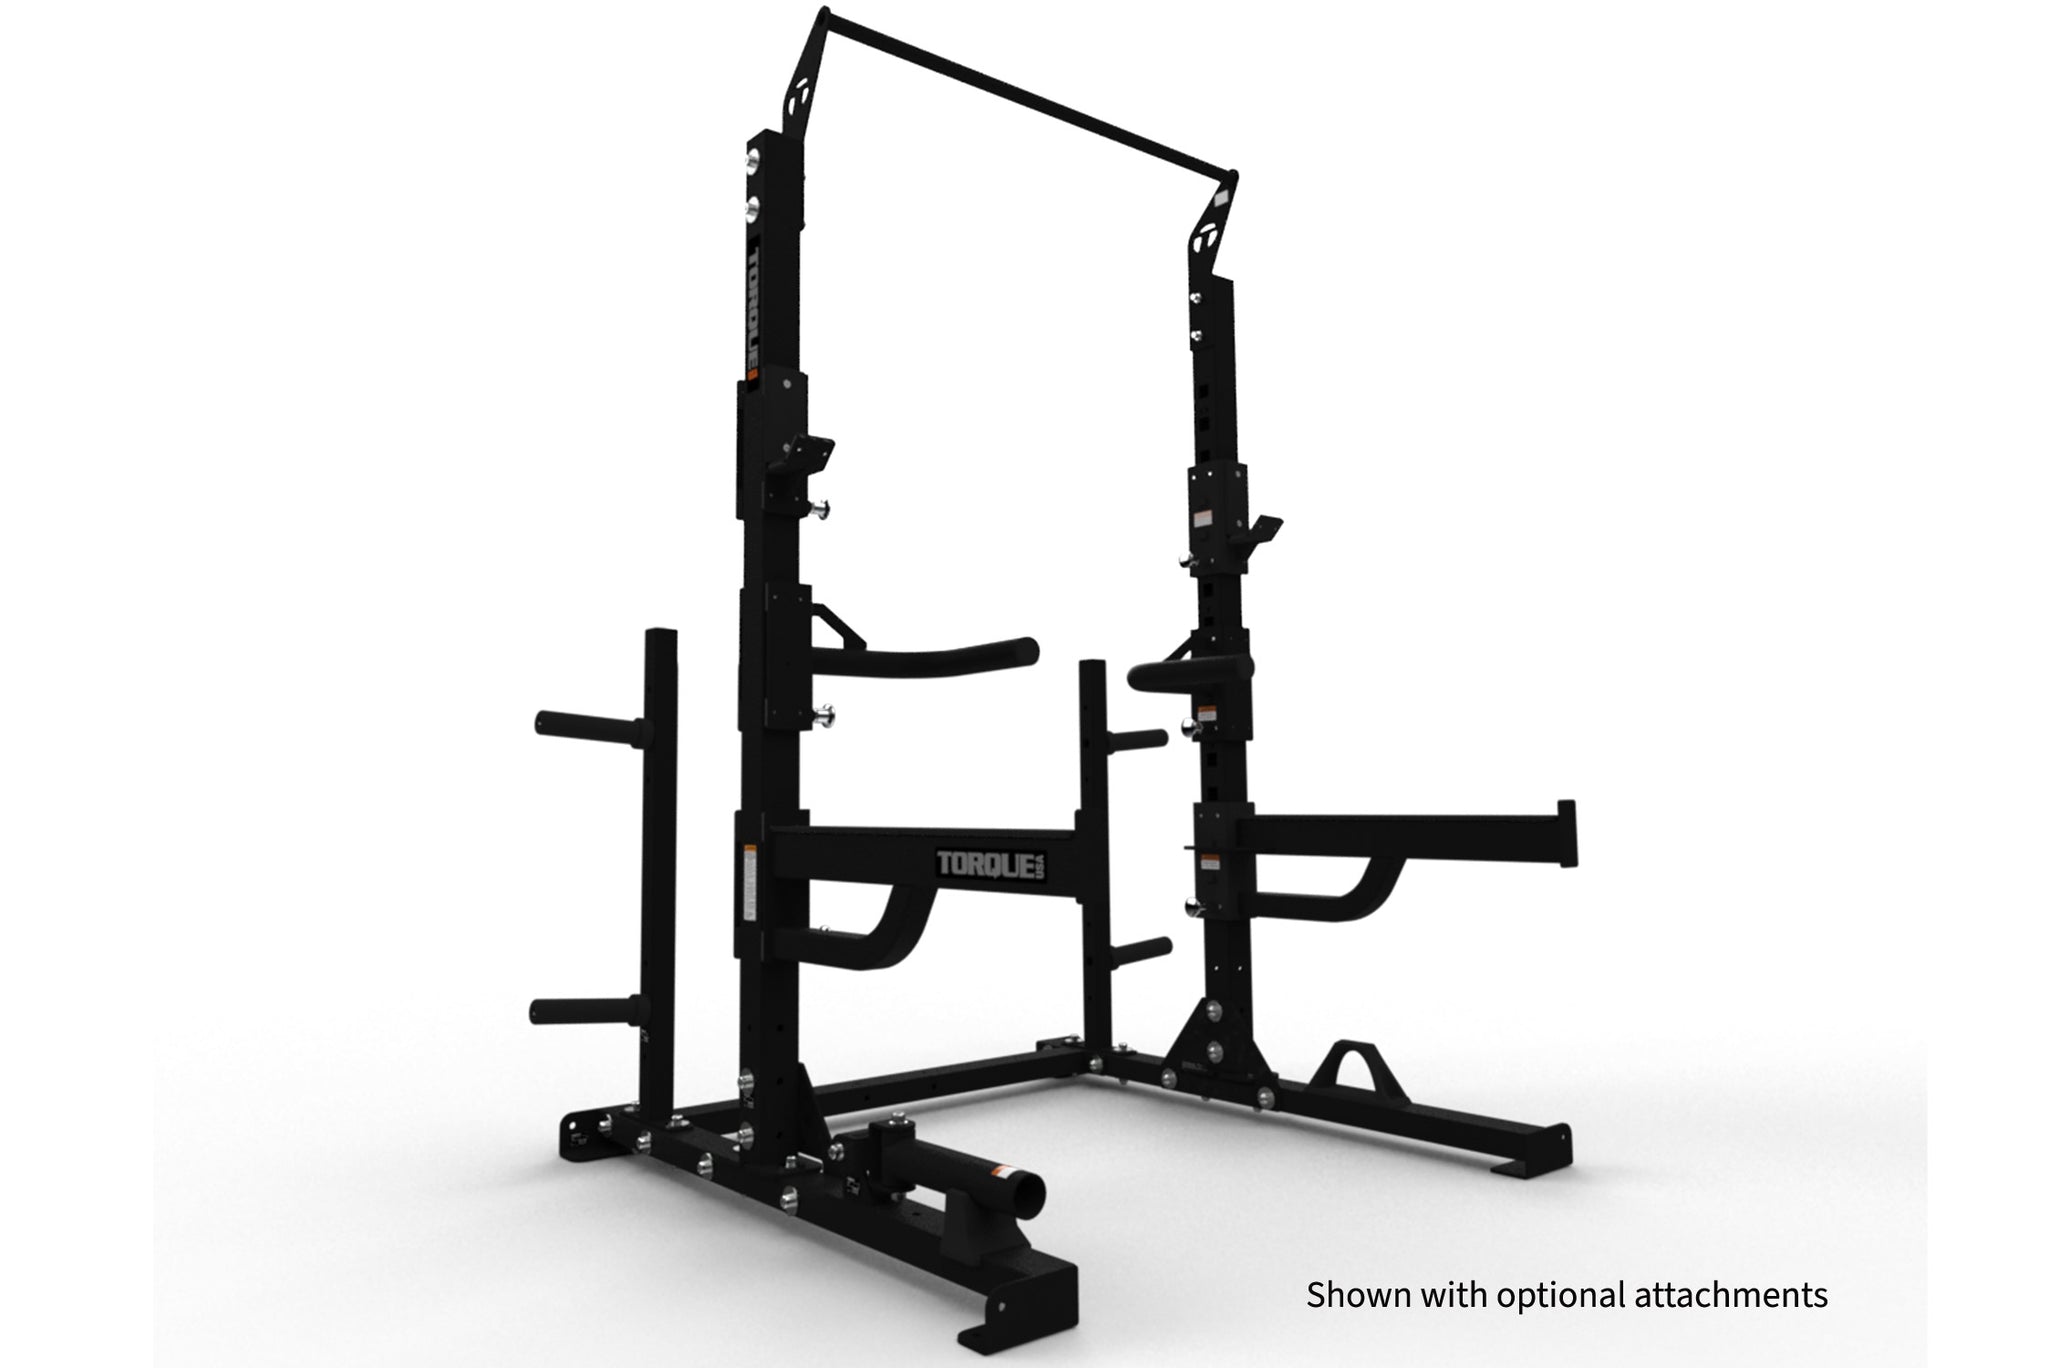 Customizable Short Squat Rack With Optional Attachments